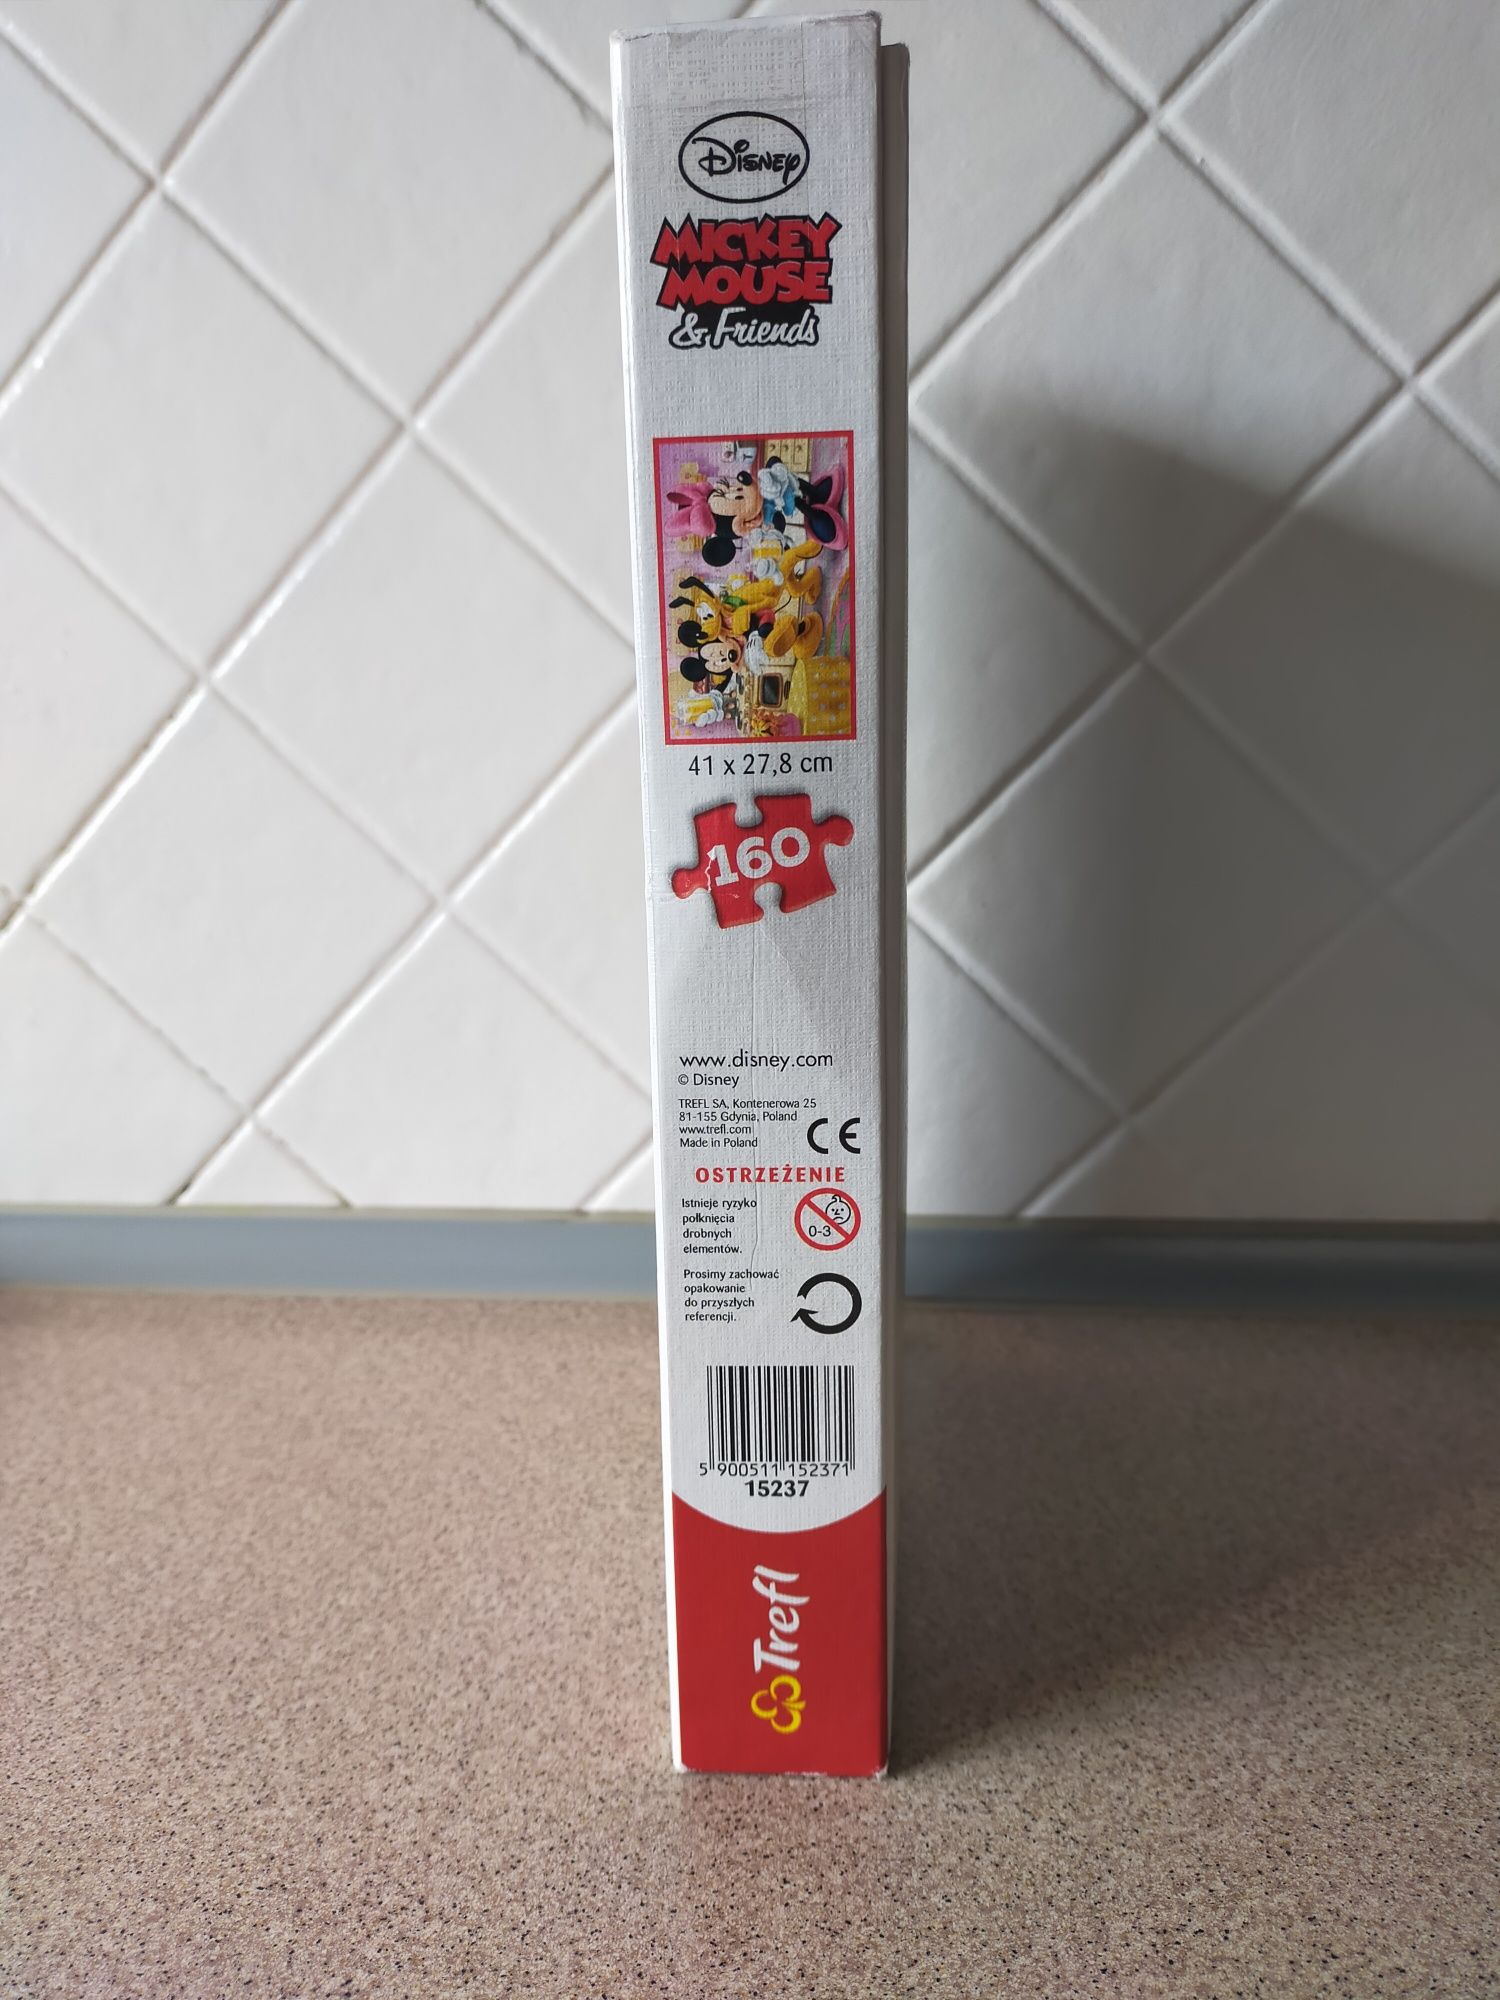 Puzzle Trefl 5+ , Mickey Mouse & Friends, 160